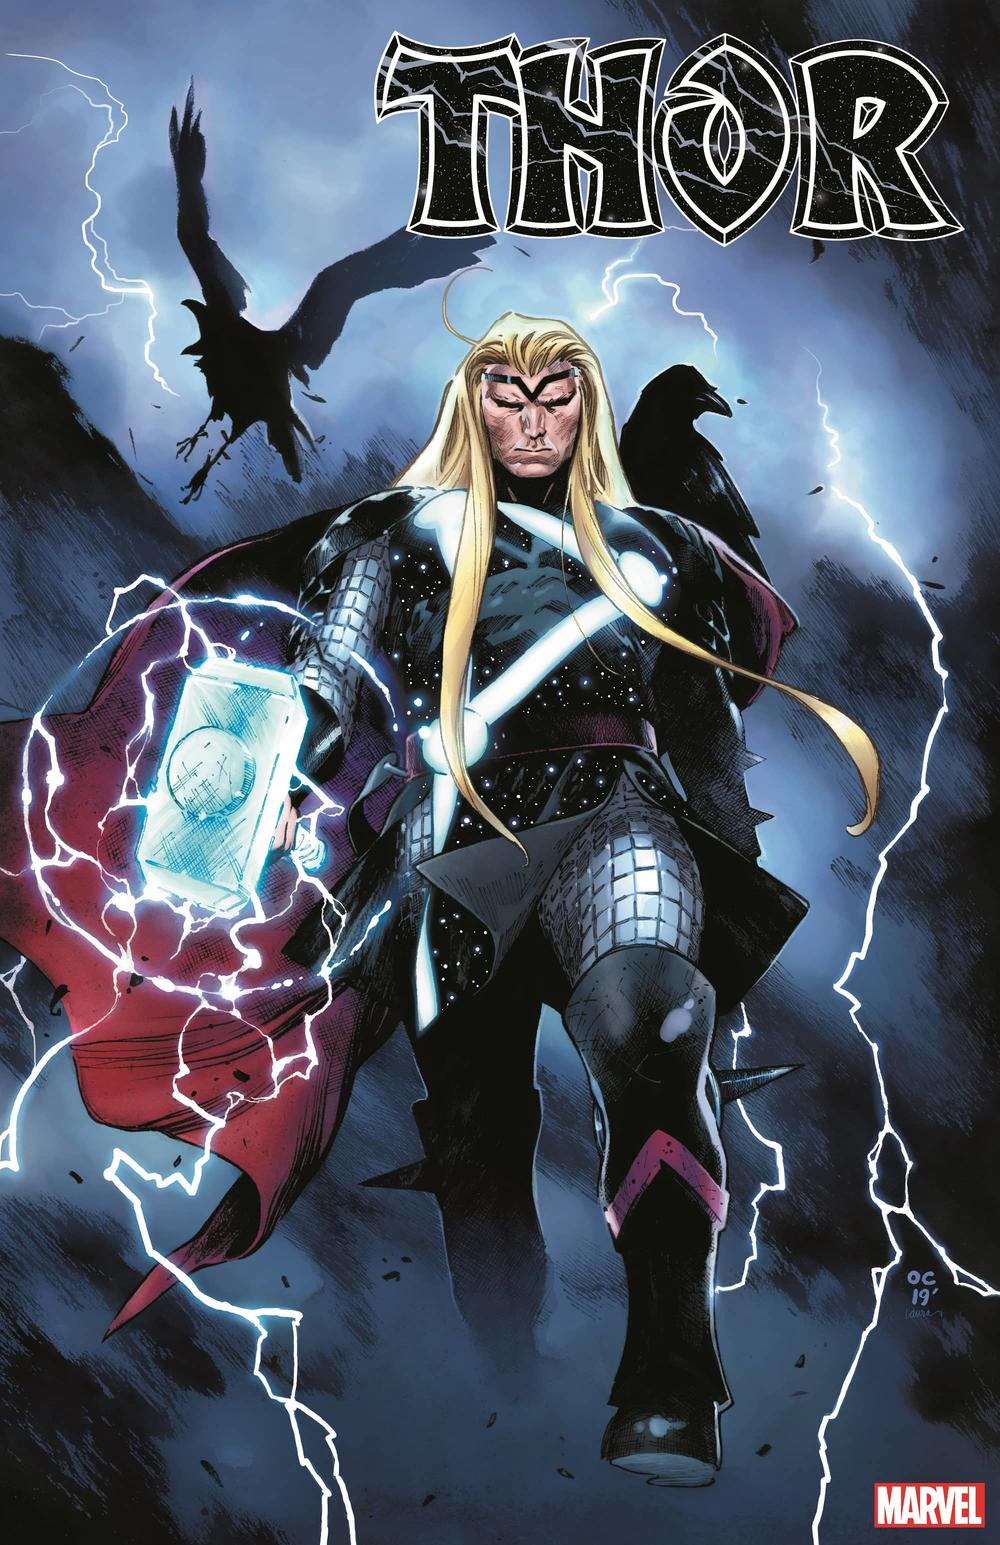 Marvel Comics releases Thor #1 "Bold New Direction" trailer